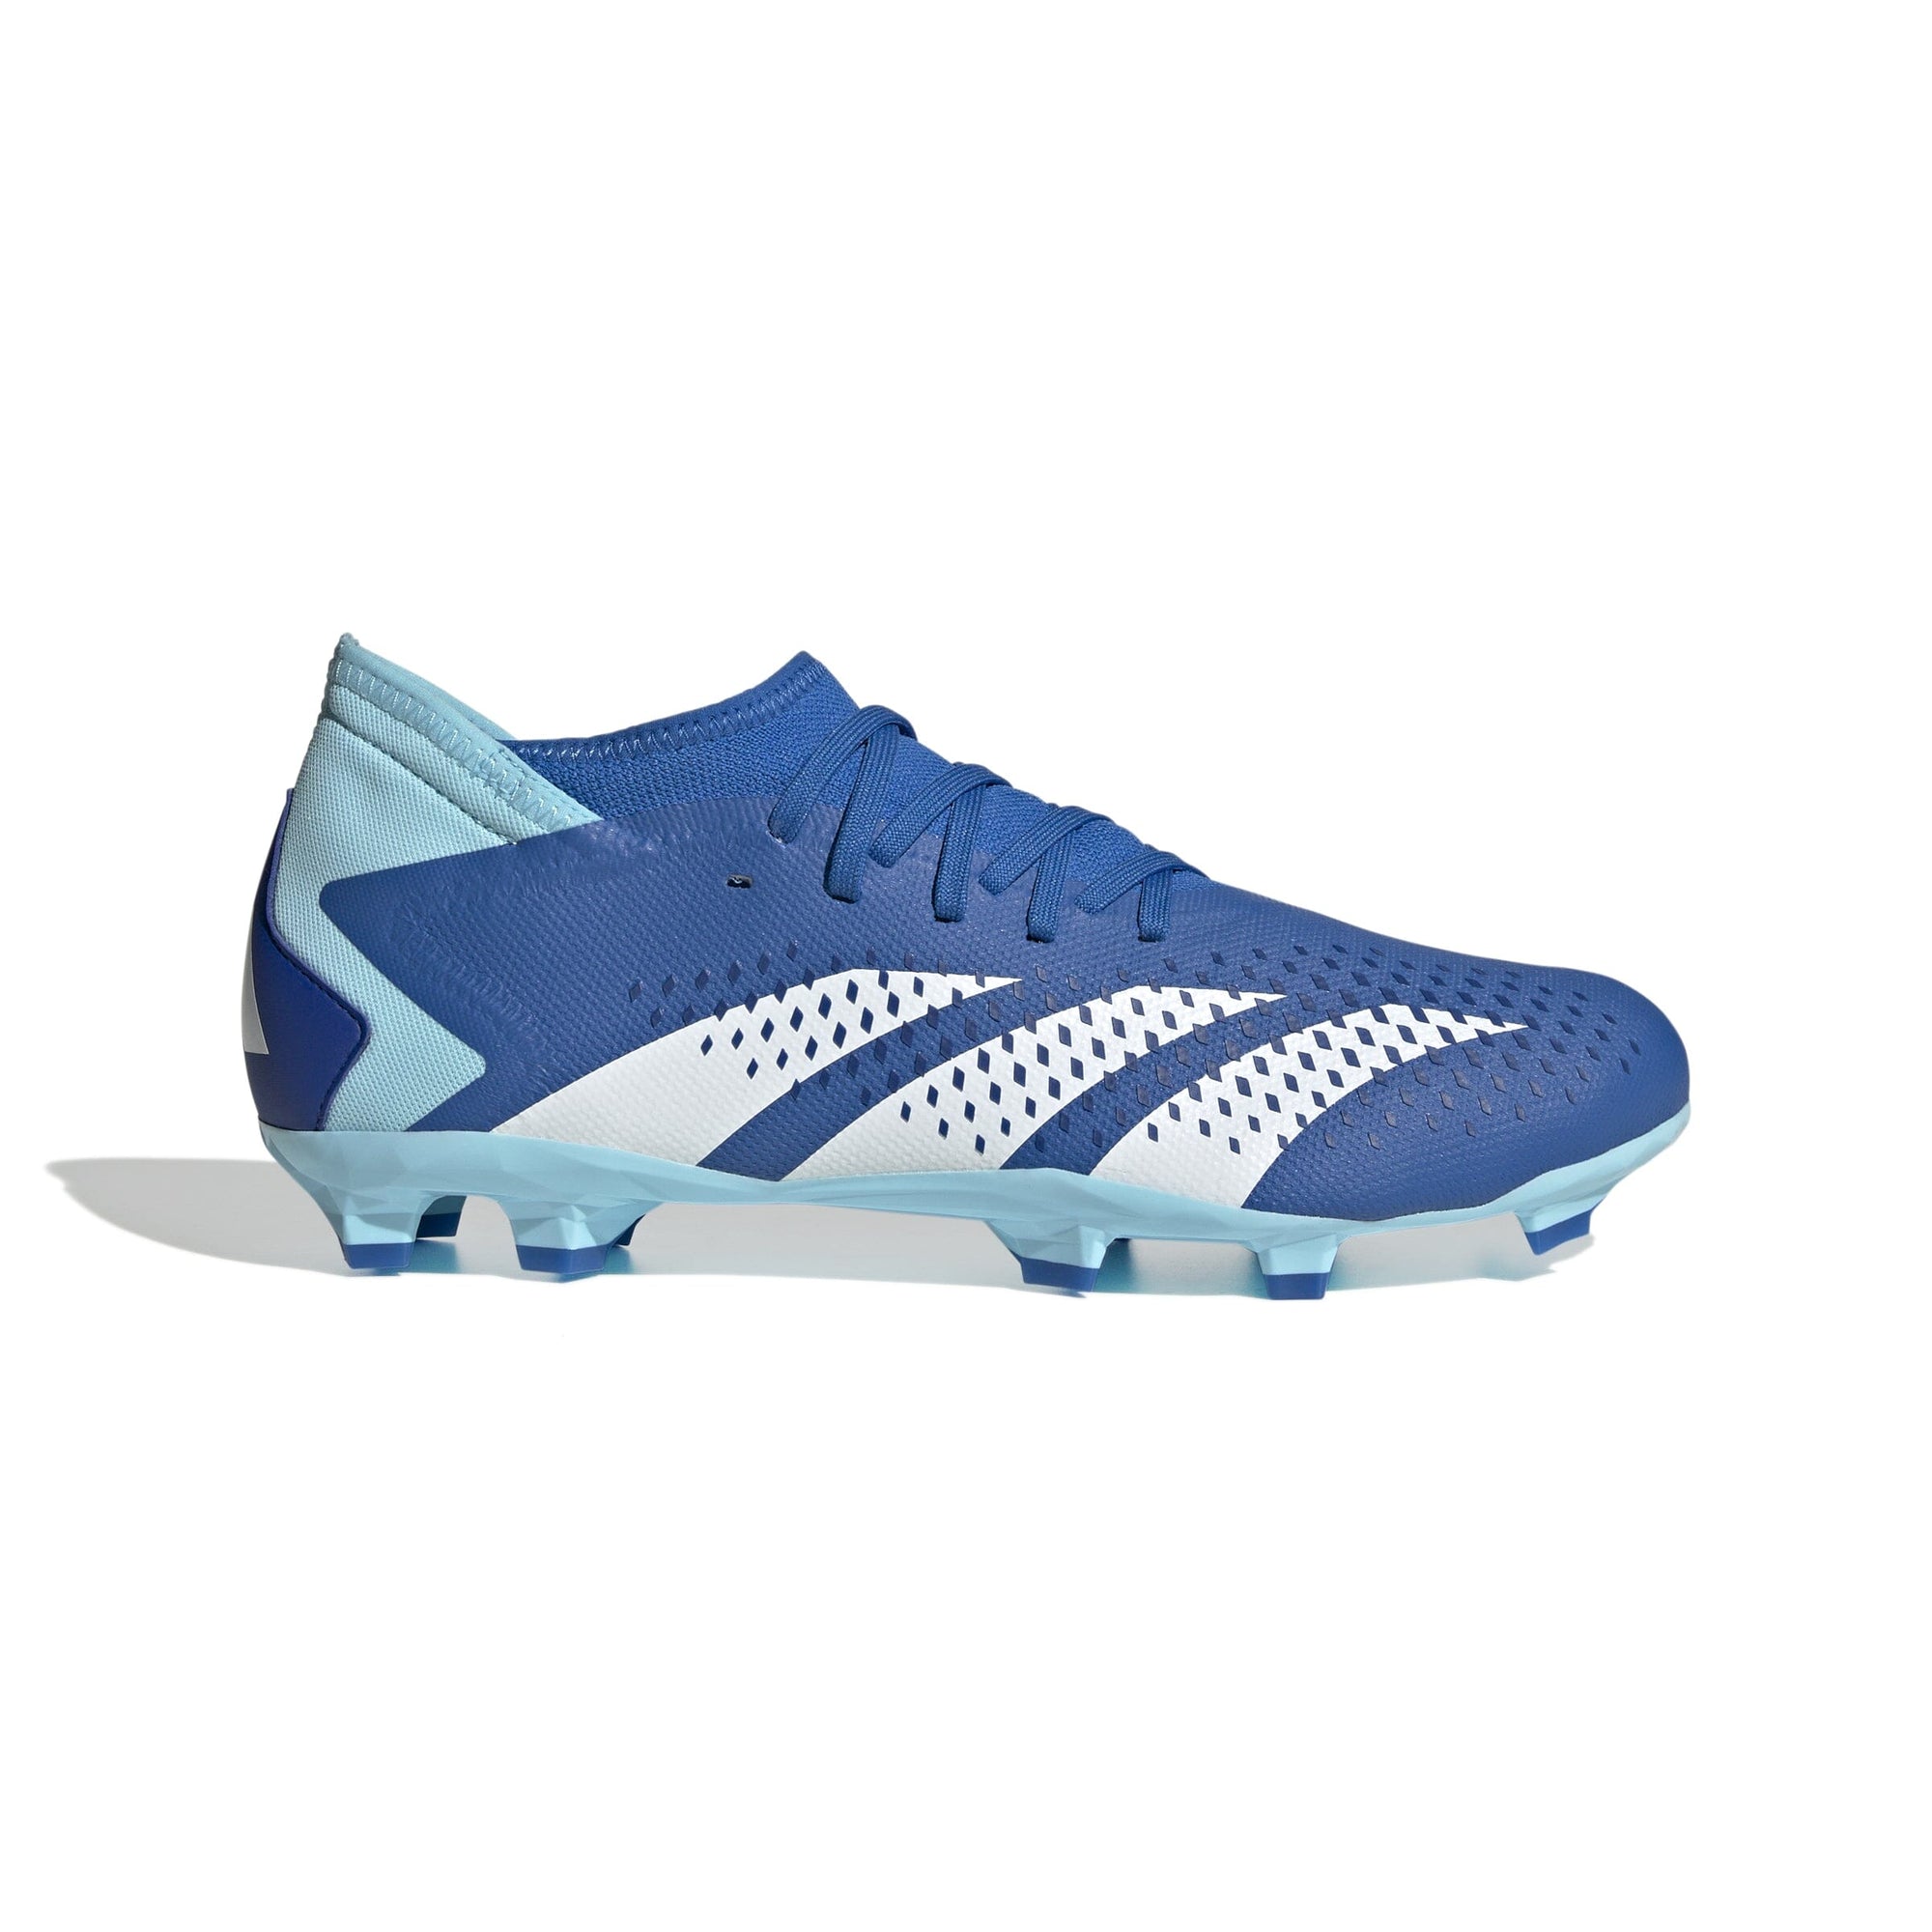 adidas Unisex Predator Accuracy.3 Firm Ground Cleats | GZ0026 Soccer Cleats Adidas 6 Bright Royal / FTWR White / Bliss Blue 